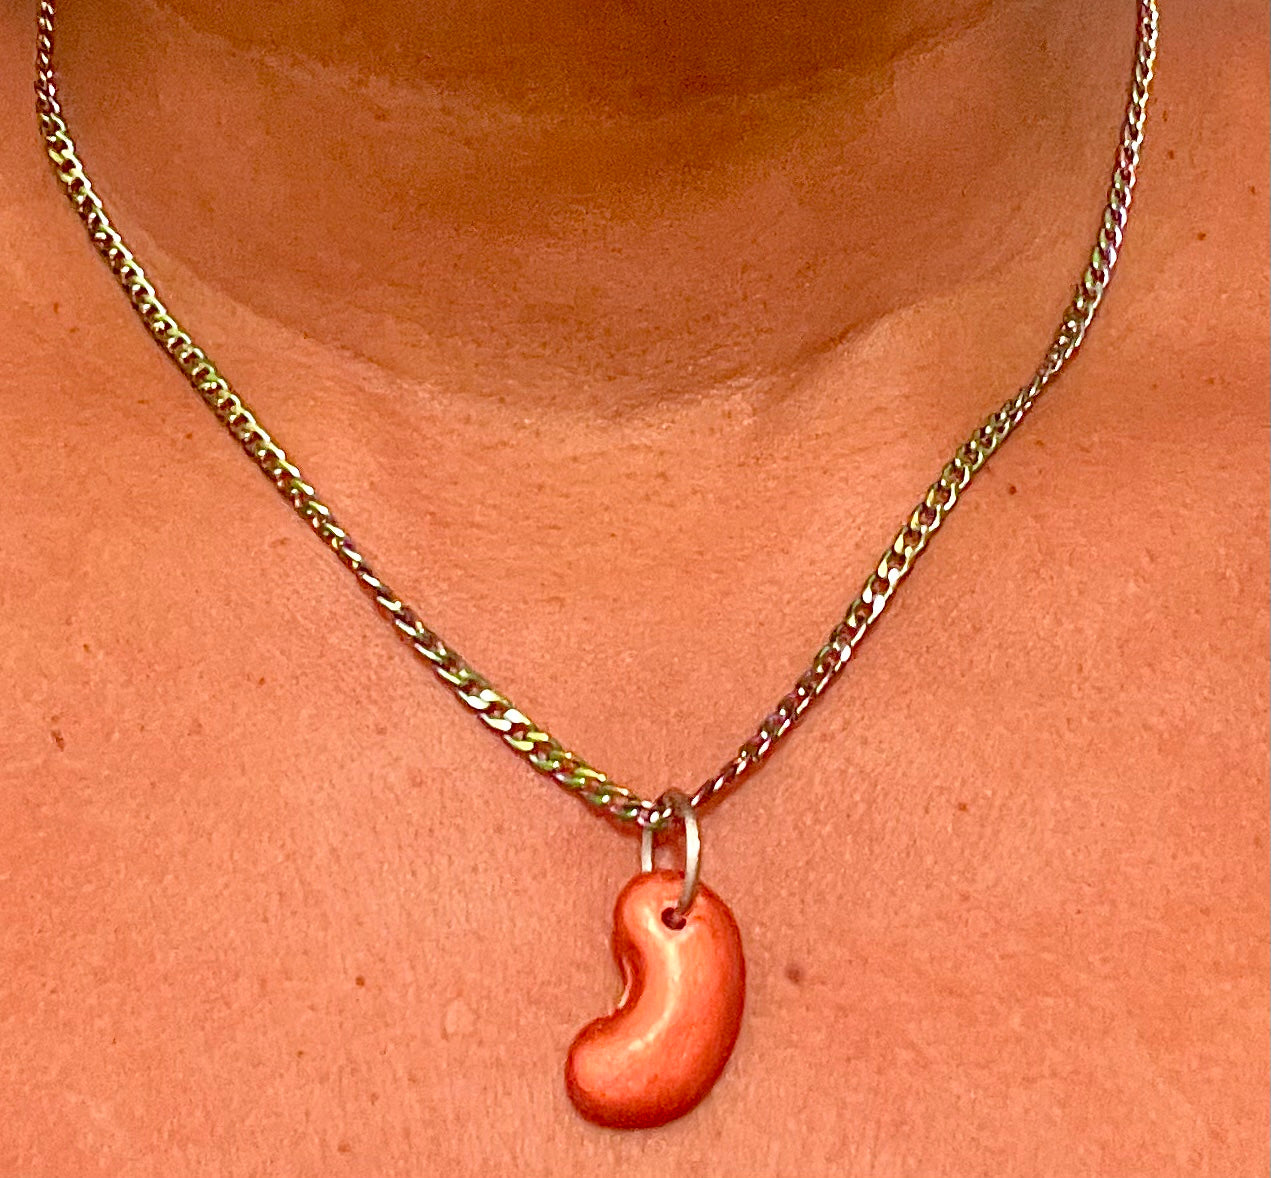 Red beans dreams necklace